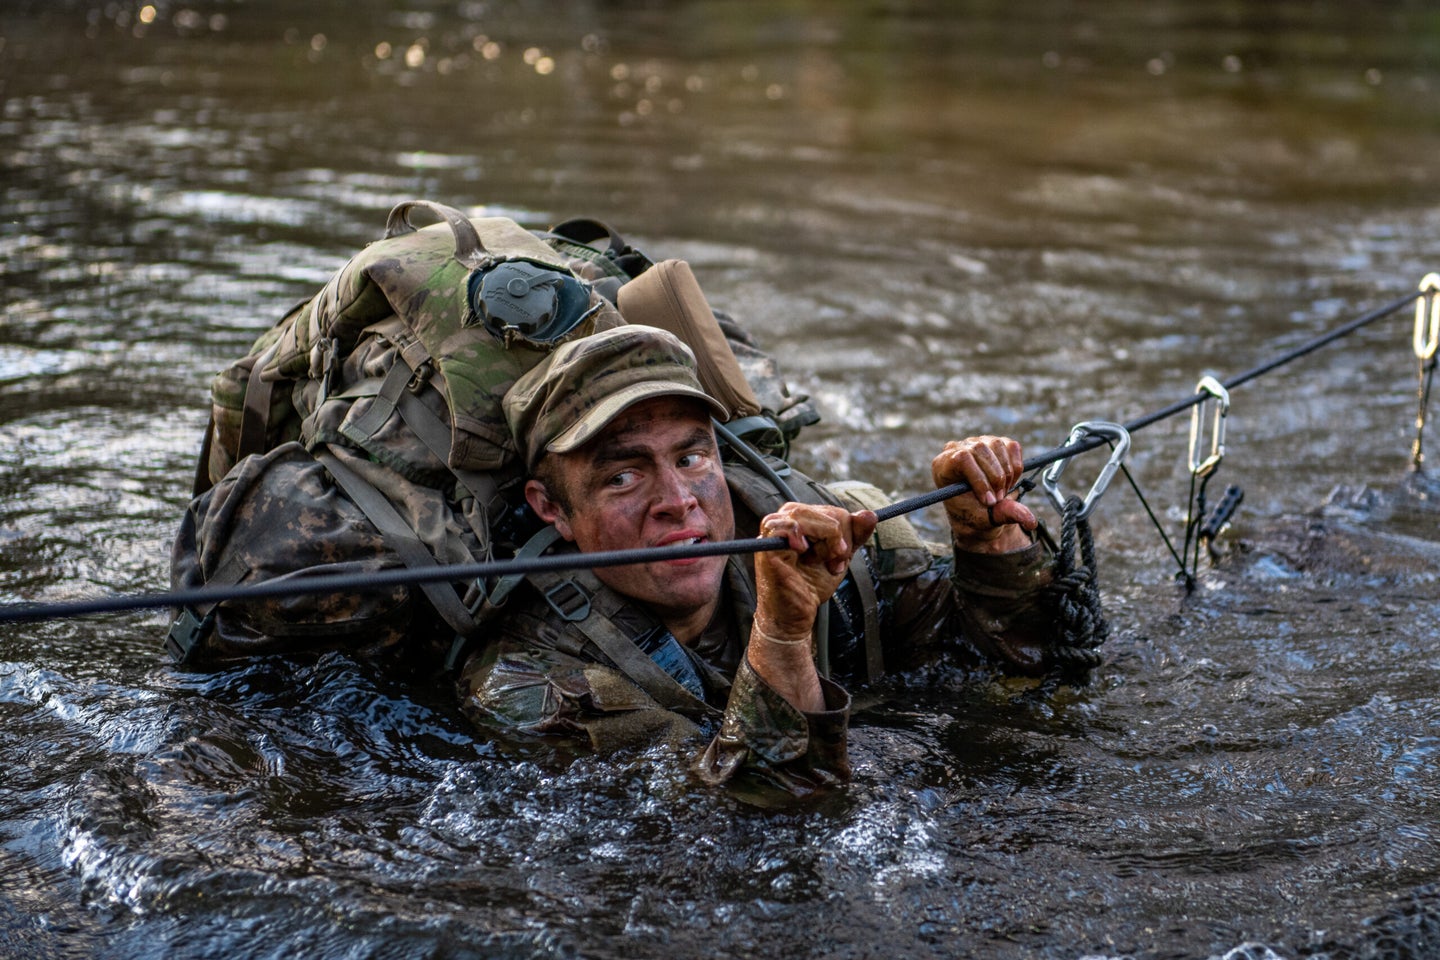 A Ranger candidate crossing a river during Florida Phase of Ranger School.